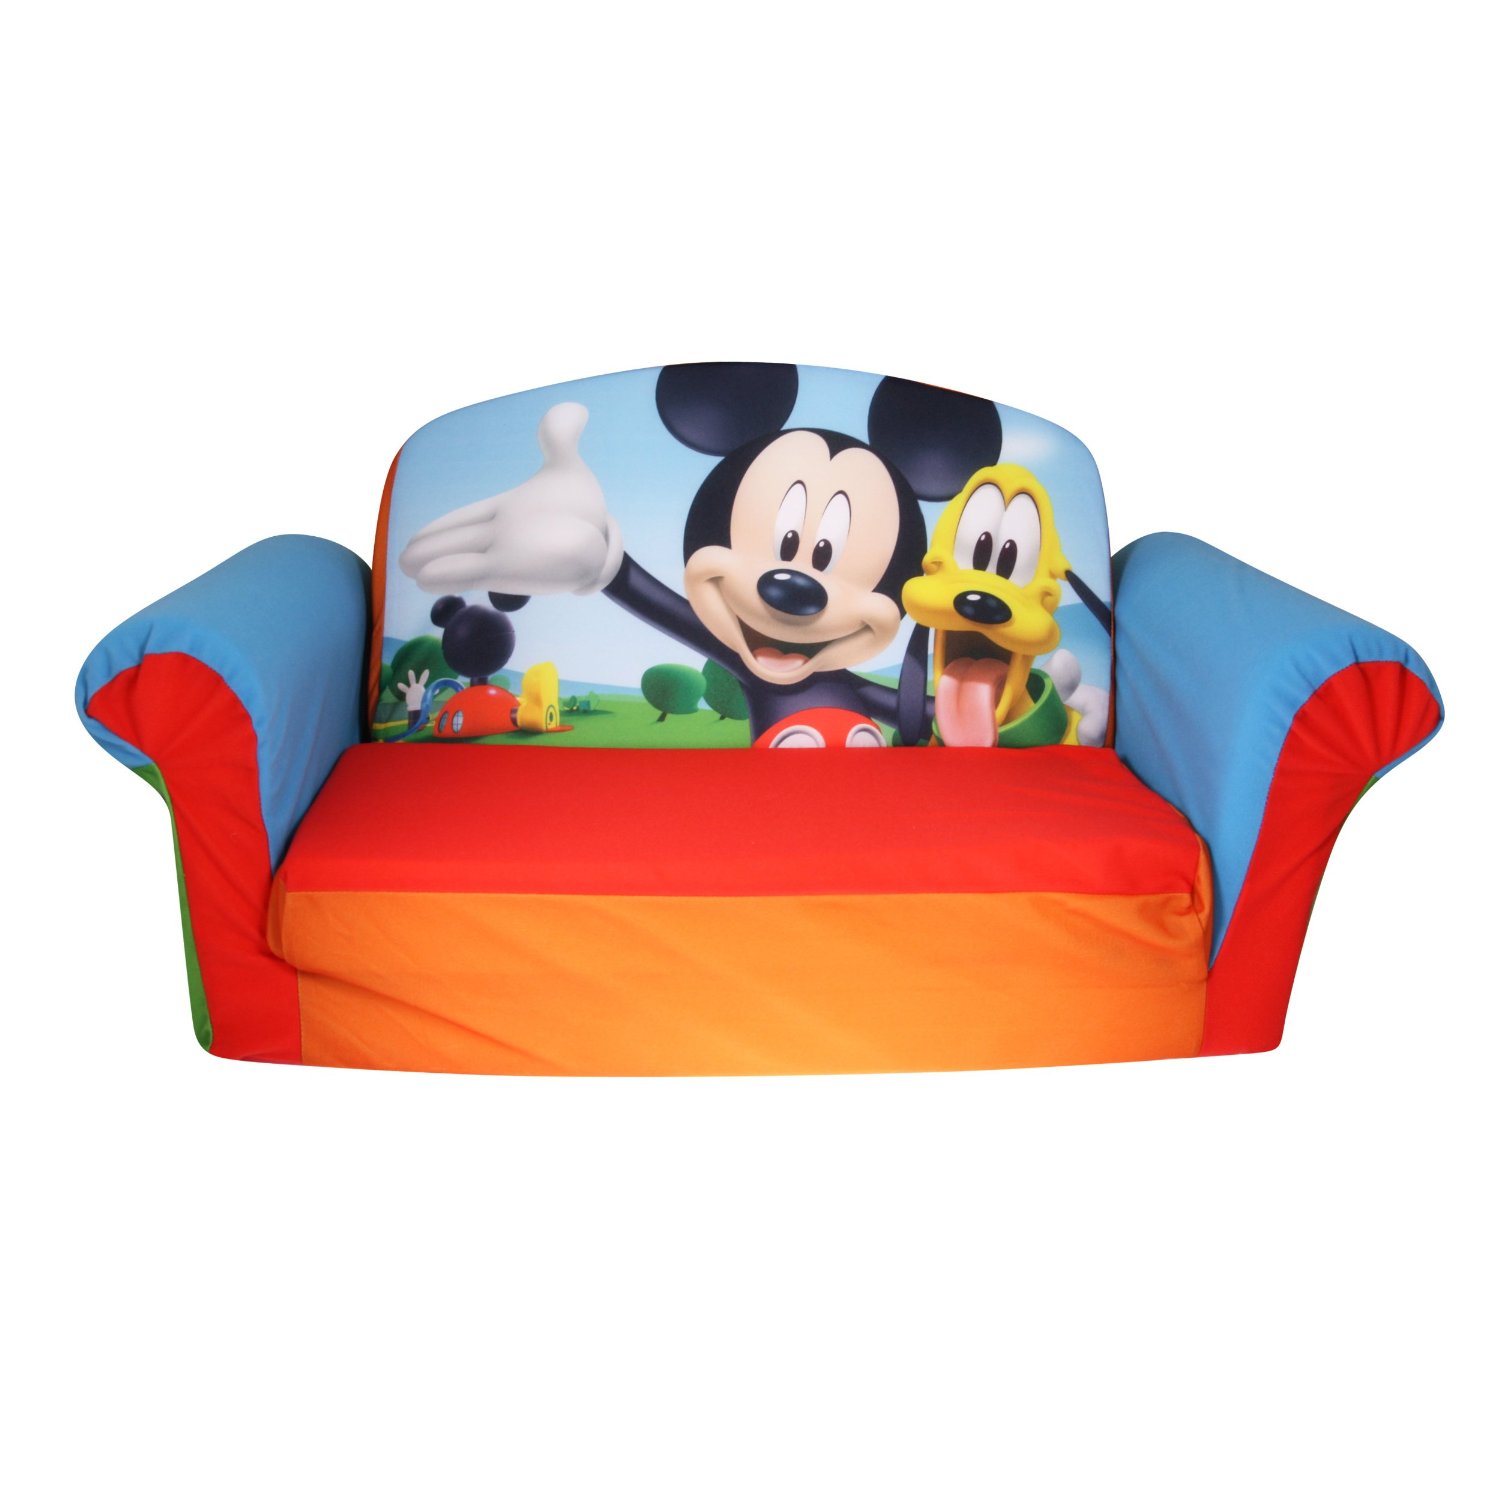 Marshmallow Furniture, Children's 2 in 1 Flip Open Foam Sofa, Disney Mickey Mouse Club House, by Spin Master